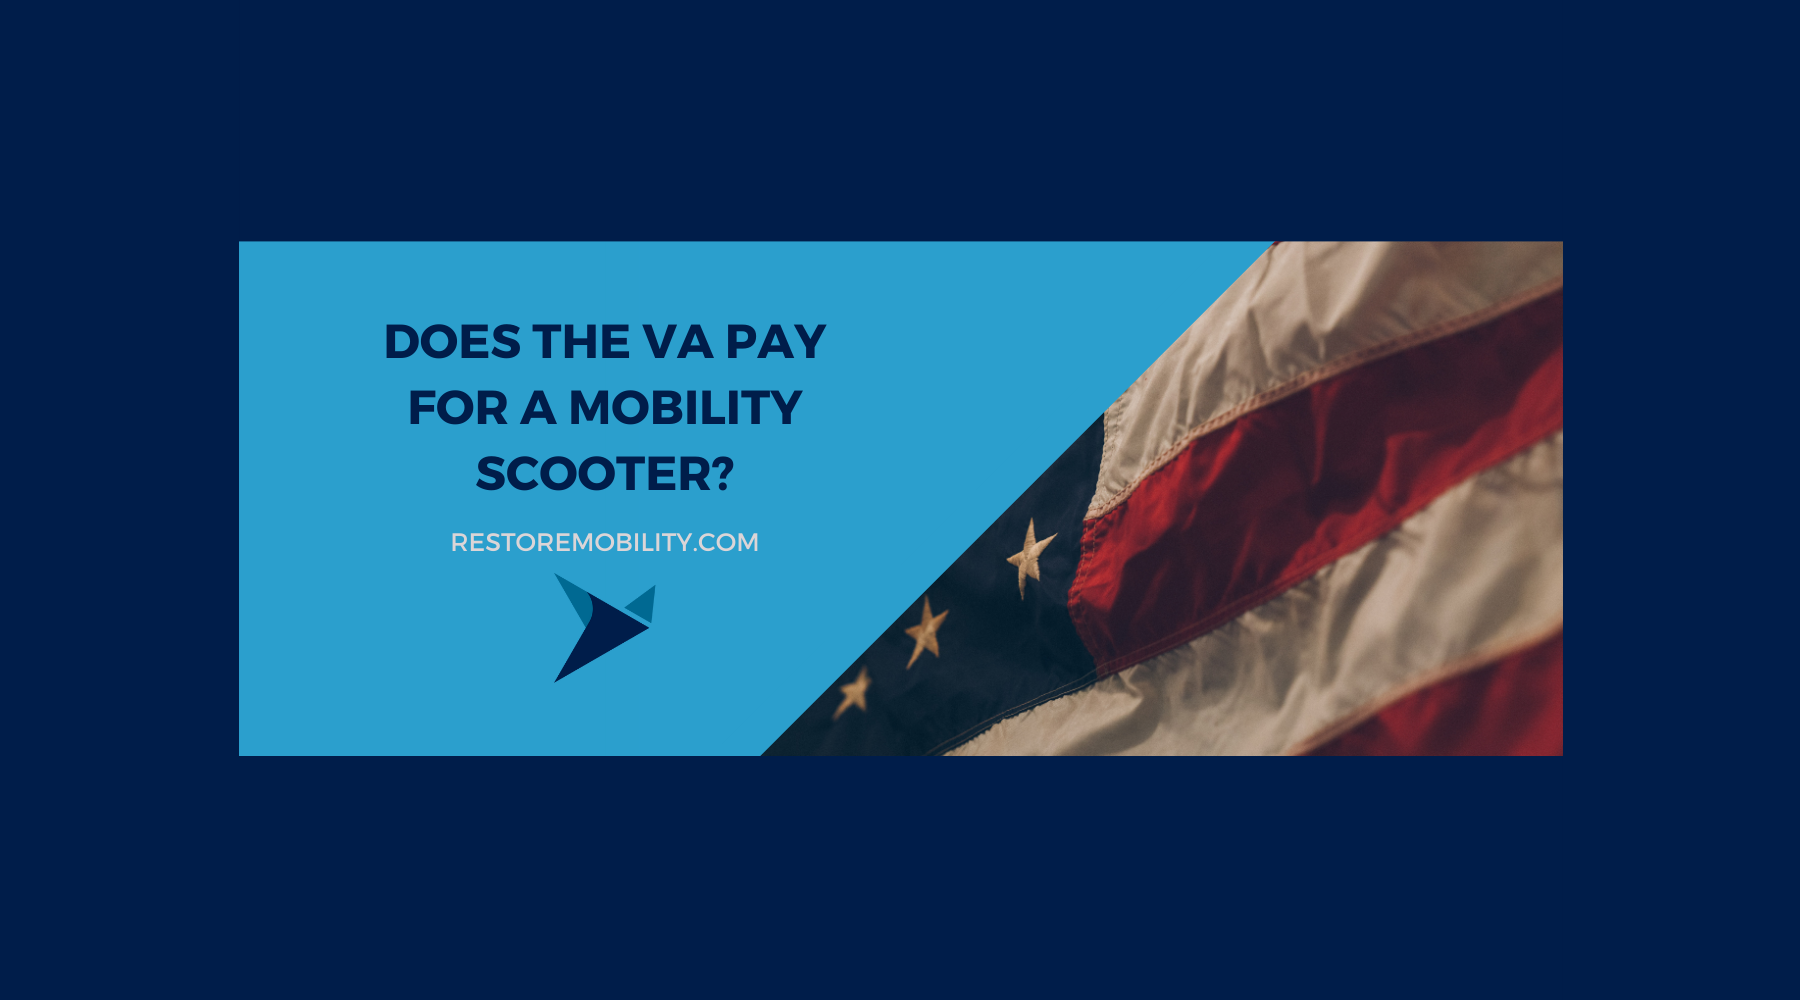 Does the VA Pay for a Mobility Scooter? A Guide For Veterans